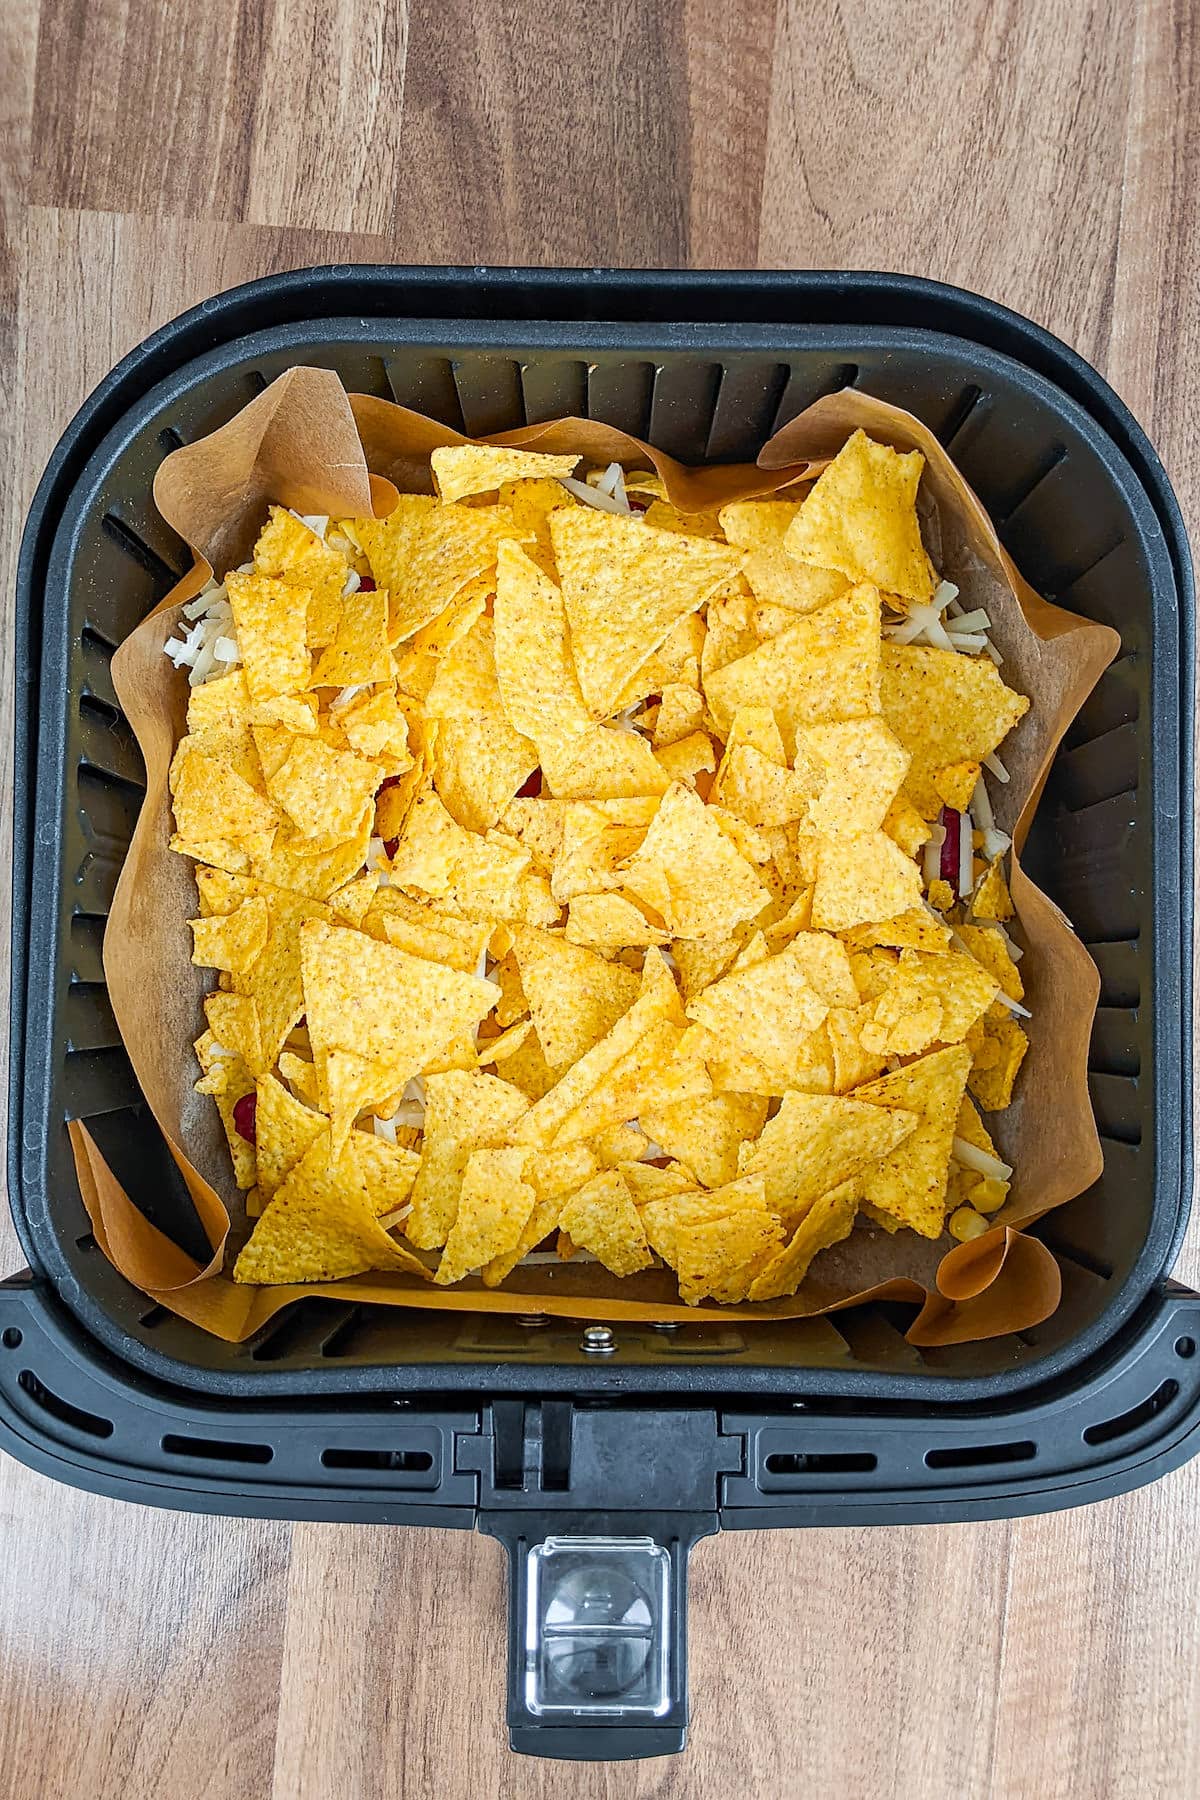 Top view of air fryer basket with tortilla chips.